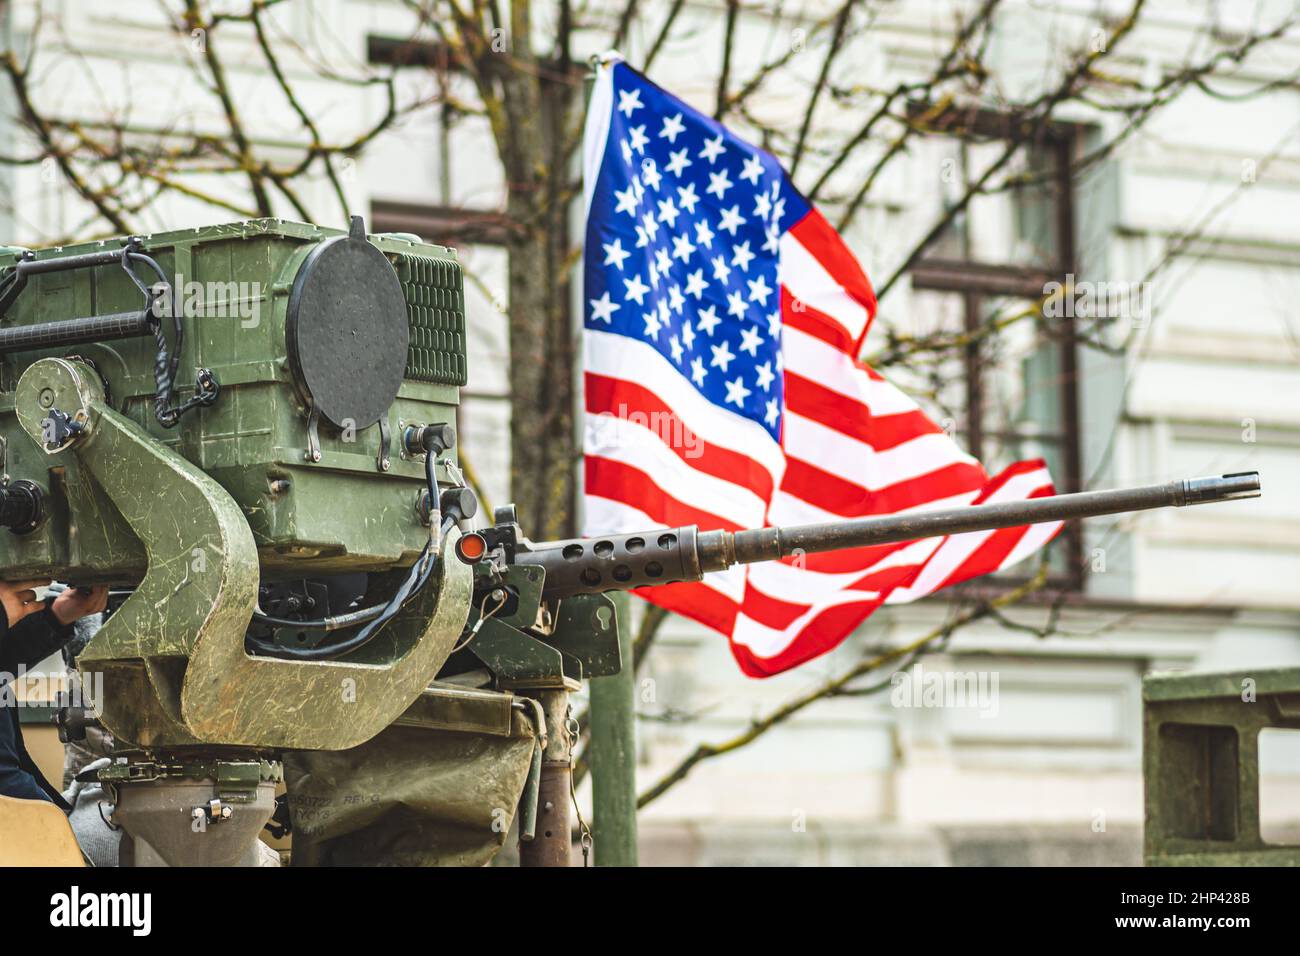 Machine gun mounted on United States Marine Corps forces tank or military vehicle, USA or US army, with American flag waiving on background Stock Photo